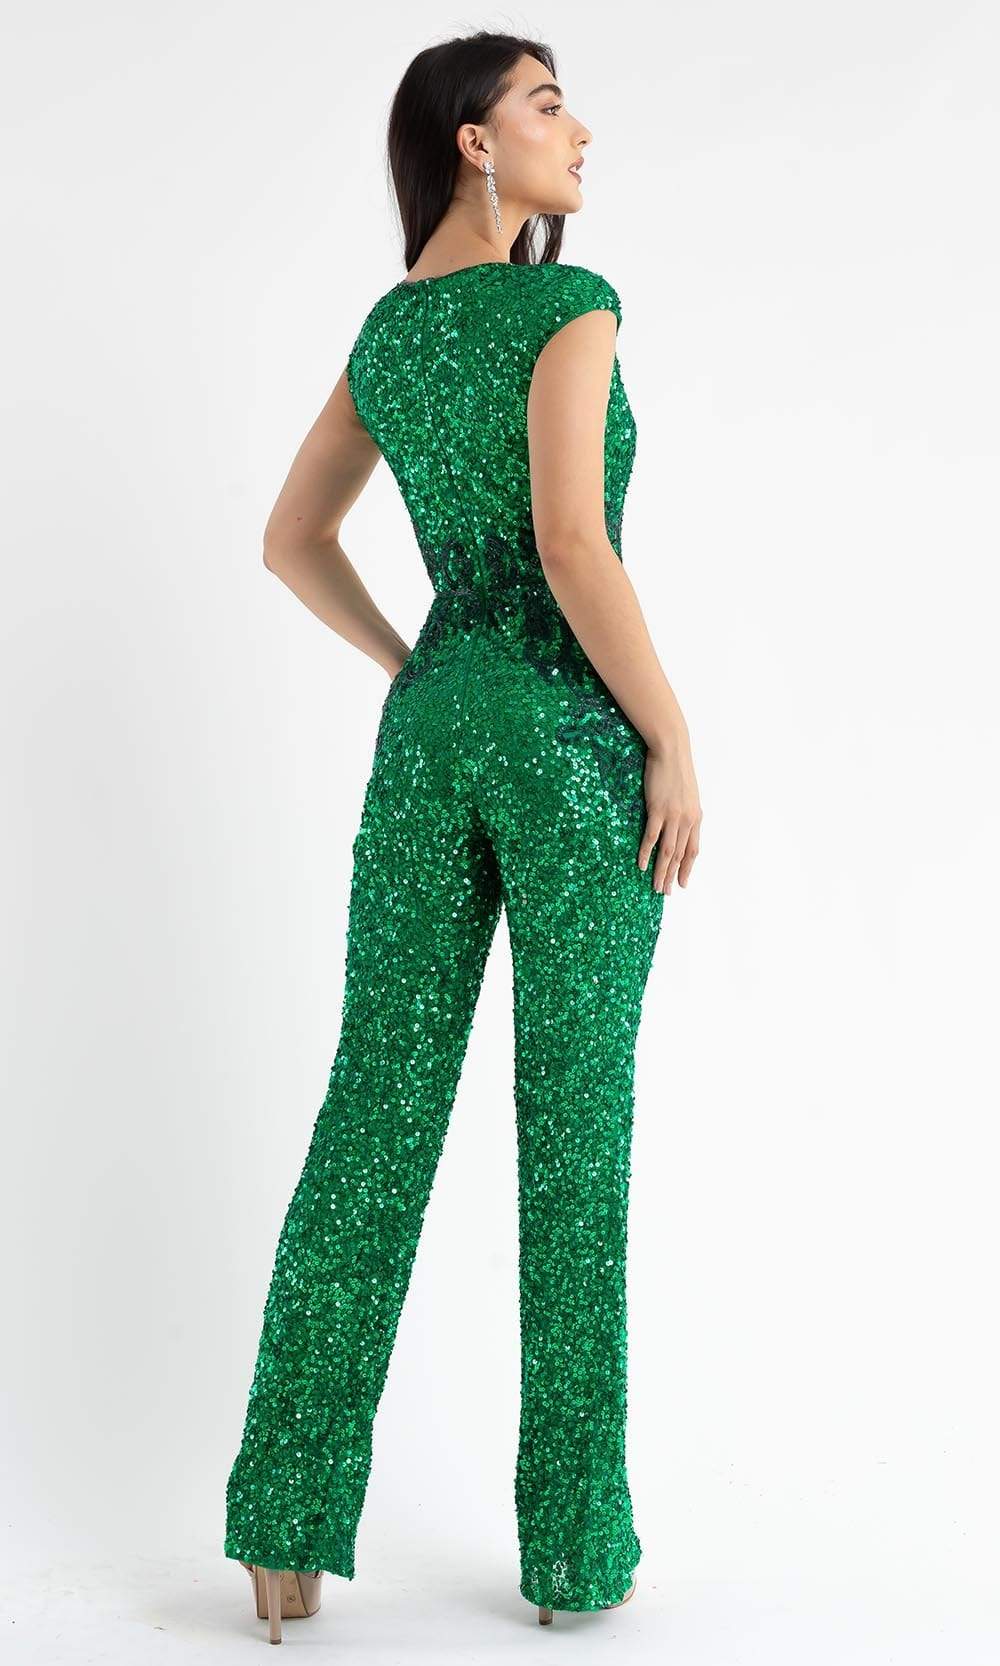 Green Emerald Jumpsuit With Long Sleeves, Formal Jumpsuit, Wedding Jumpsuit,  Bridesmaids Jumpsuit, Prom Jumpsuit, Women Jumpsuit -  Canada